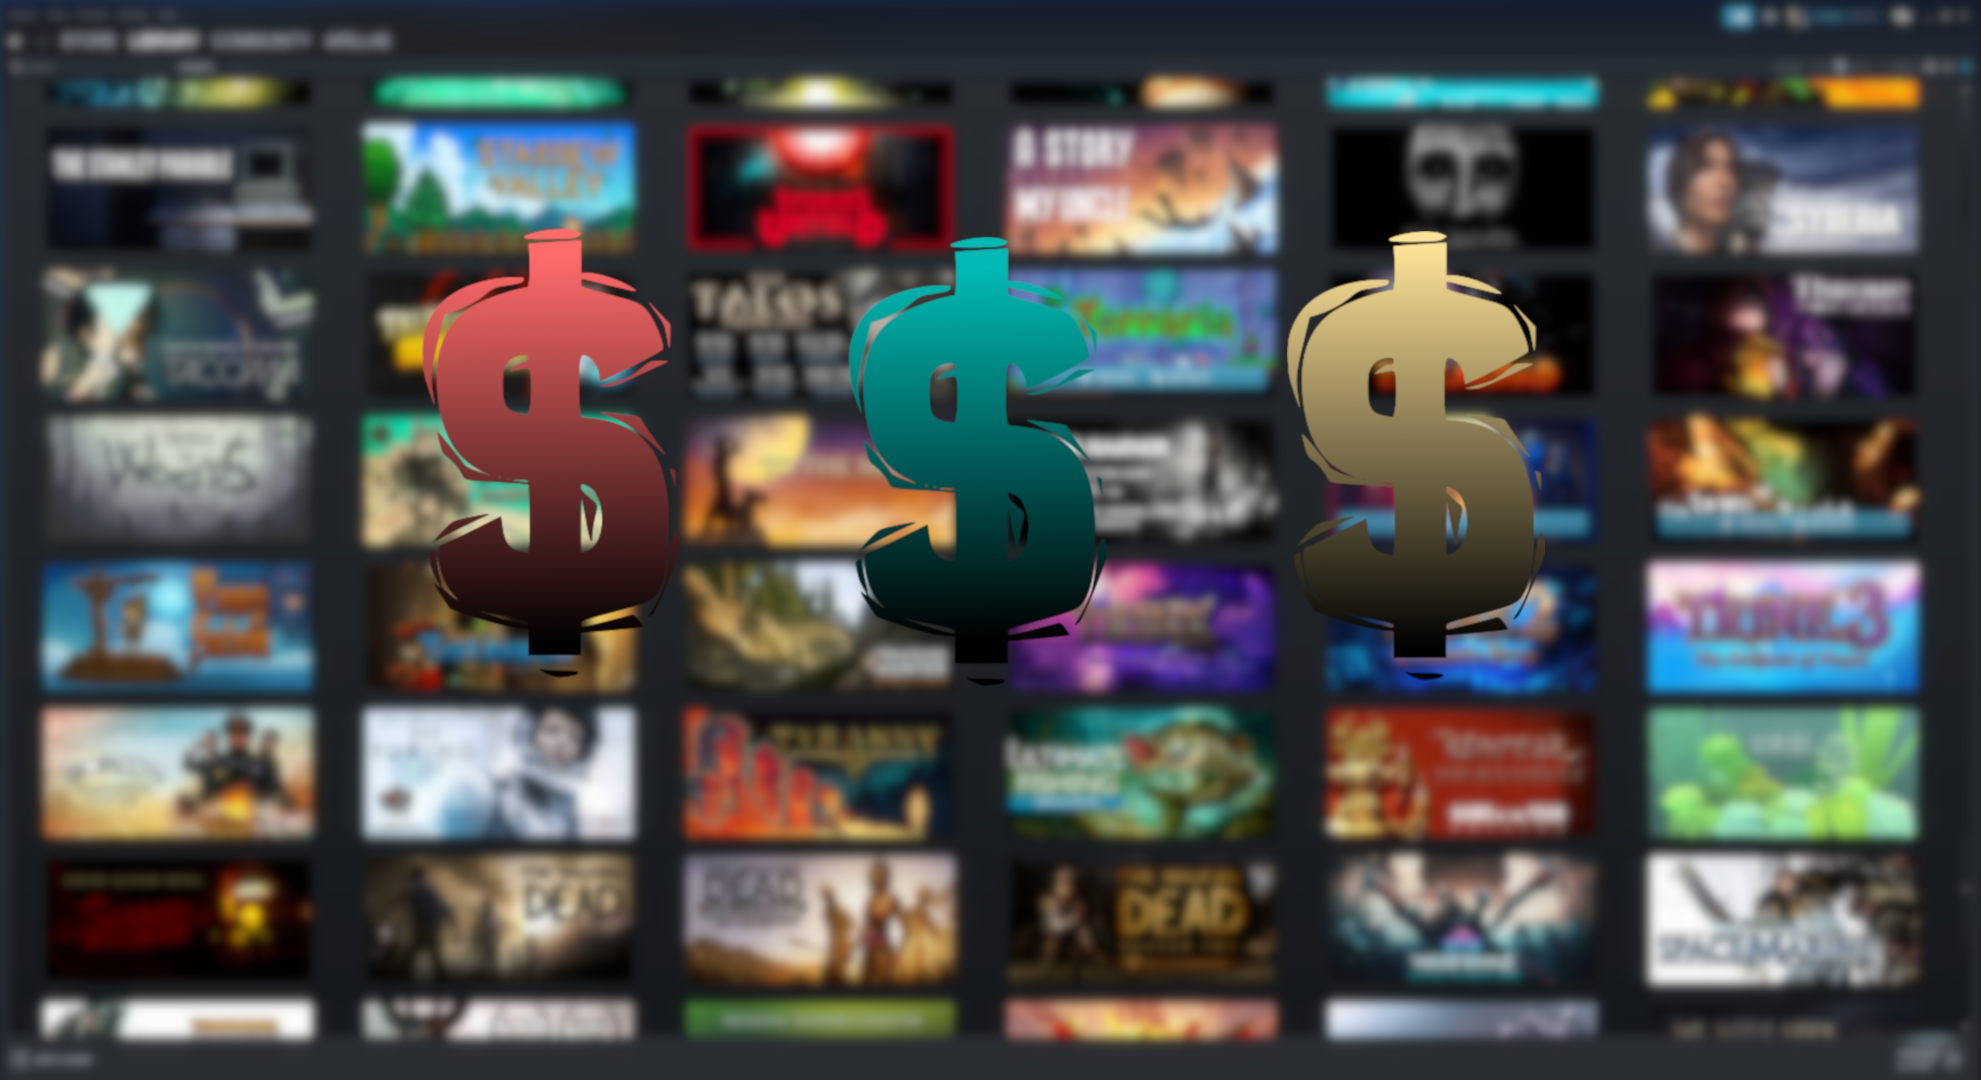 best games on steam for 20 dollors or less